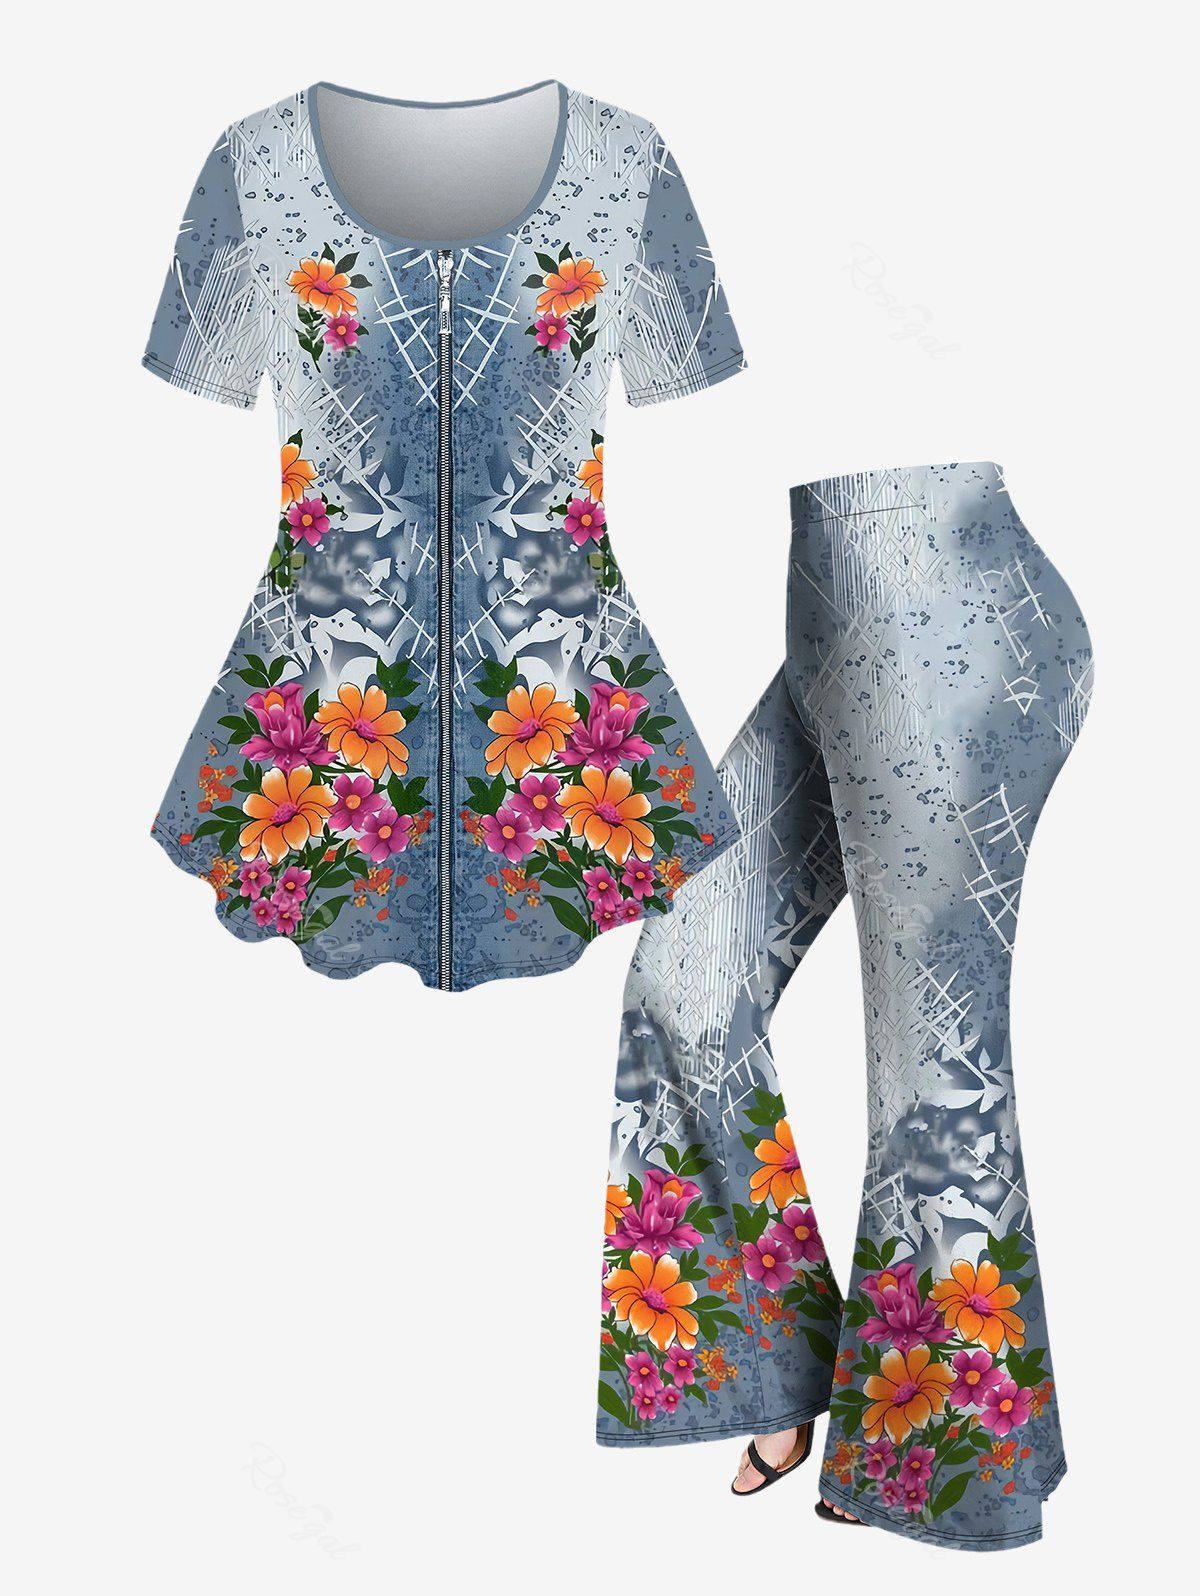 New Plus Size 3D Flower Leaves Zipper Denim Printed Short Sleeve T-Shirt and  Pants Outfit  